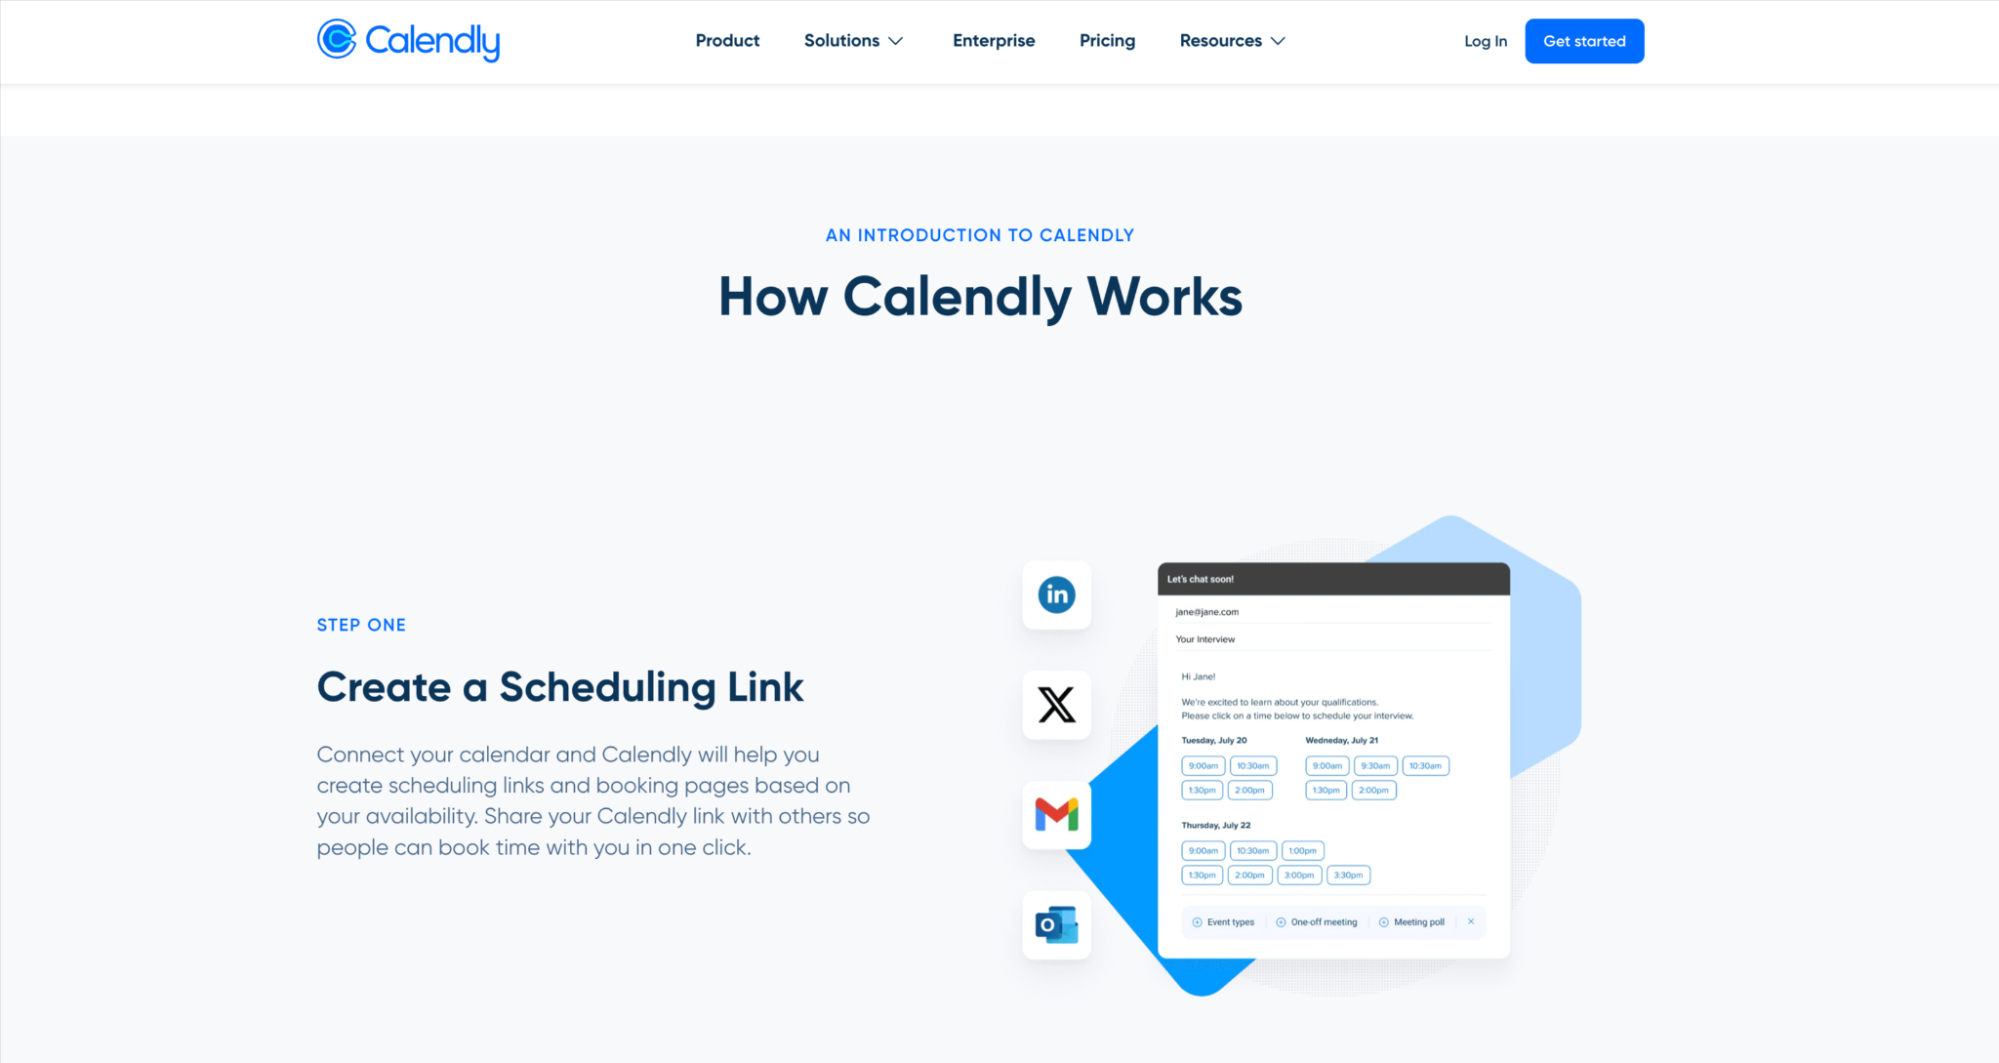 How Calendly Works